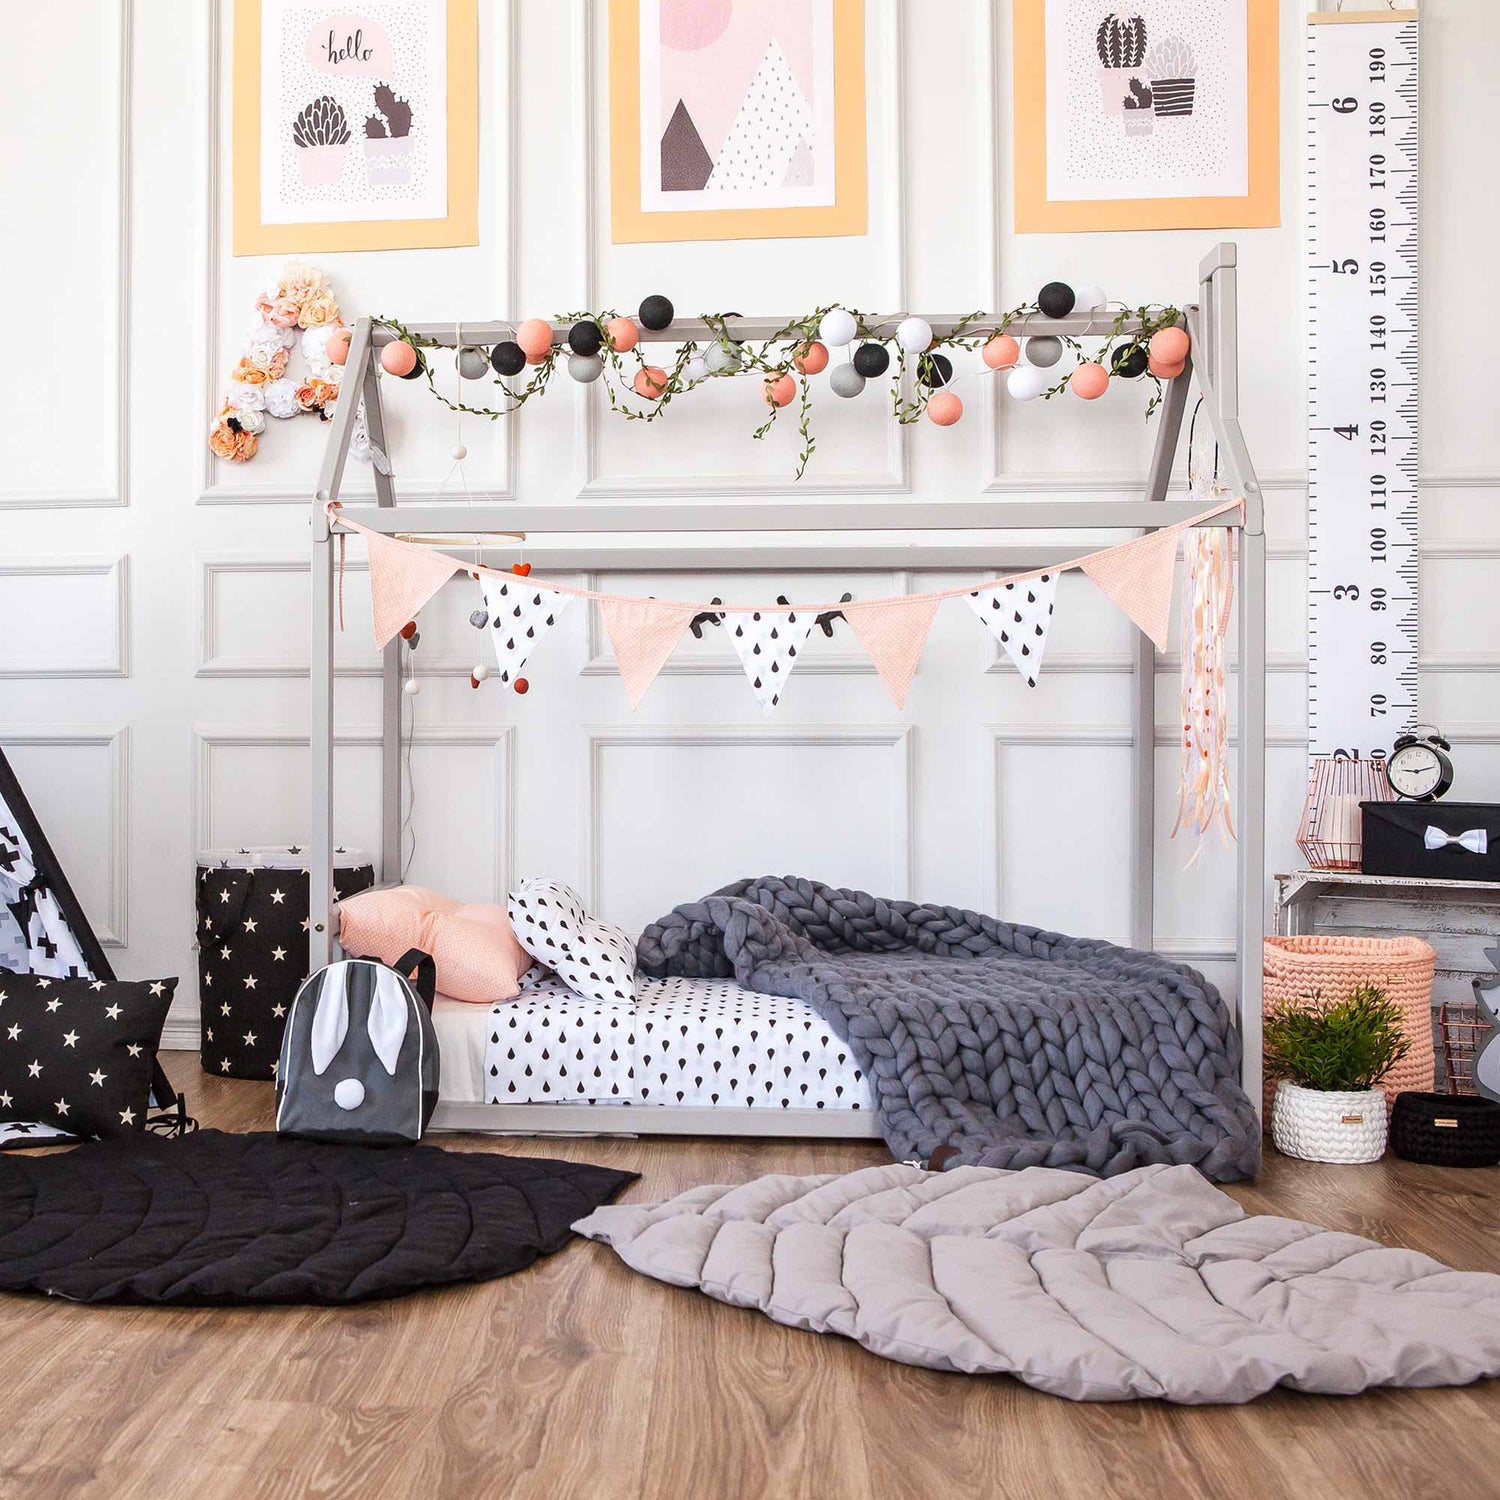 A black and white nursery with polka dots and bunting.